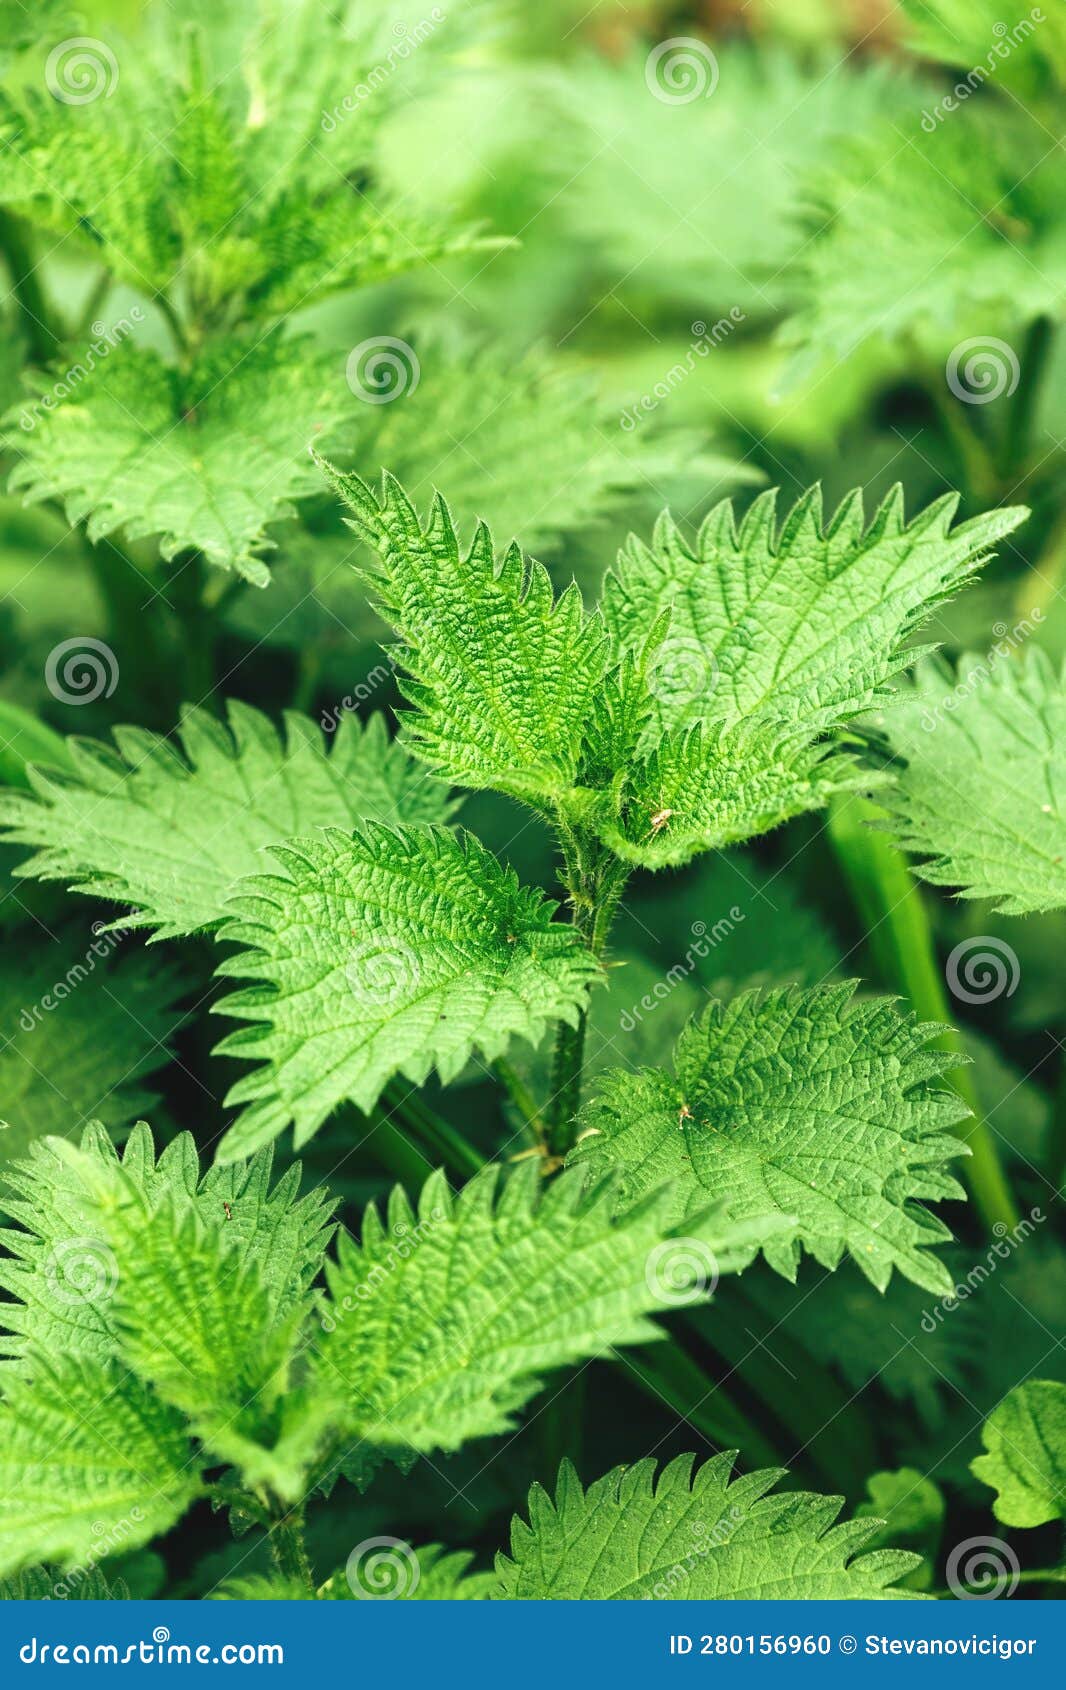 uncultivated stinging nettle in a lush green meadow